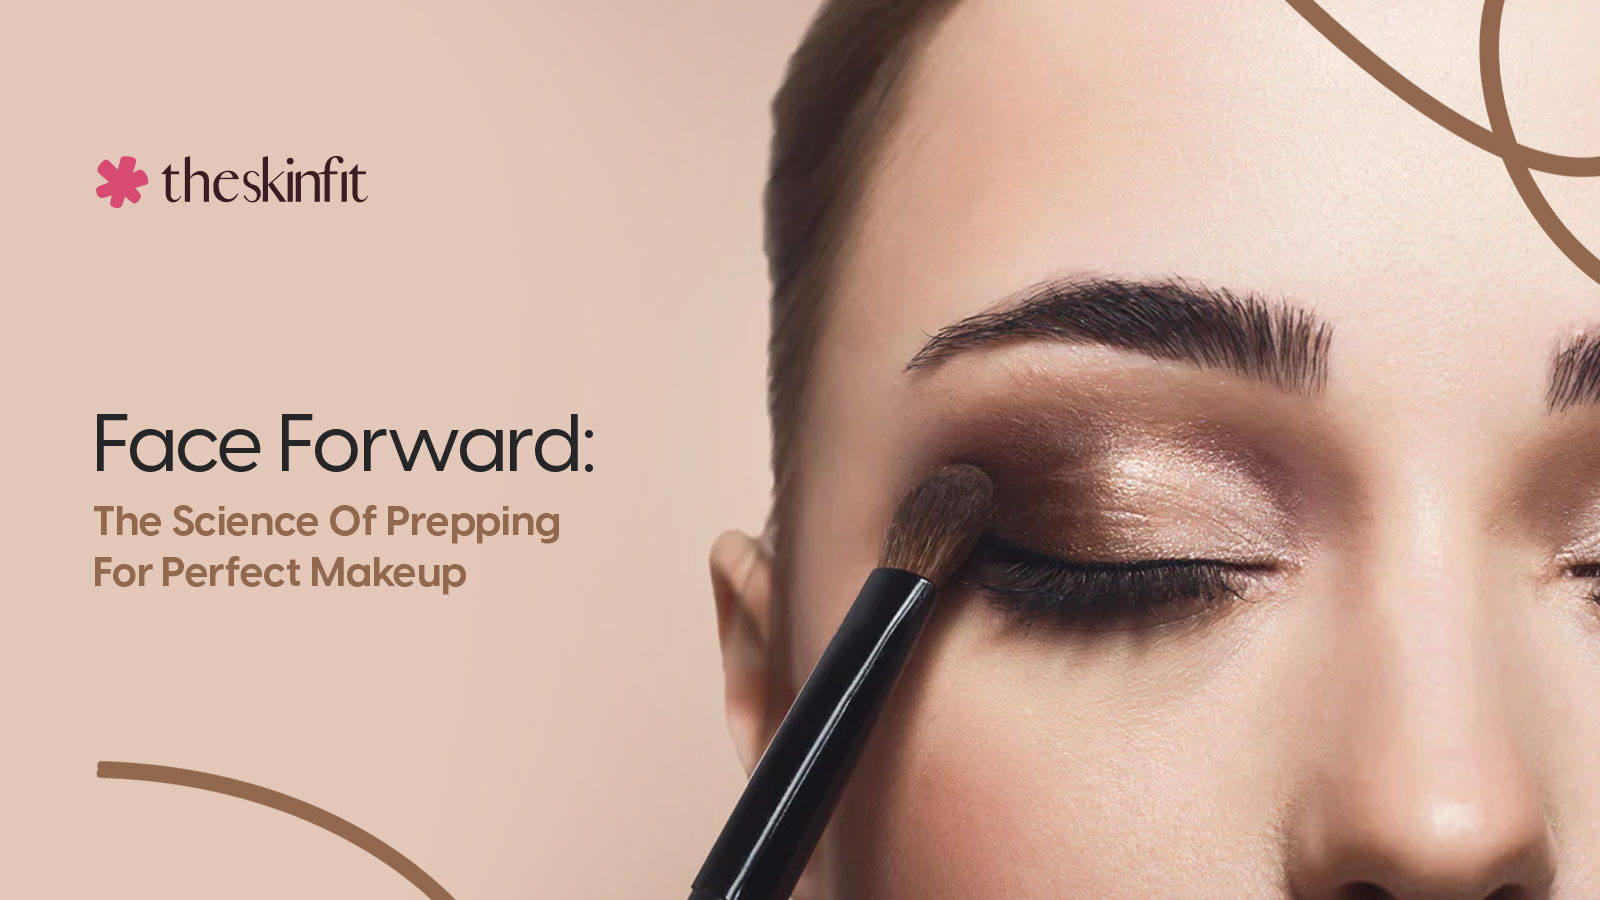 Face Forward: The Science Of Prepping For Perfect Makeup